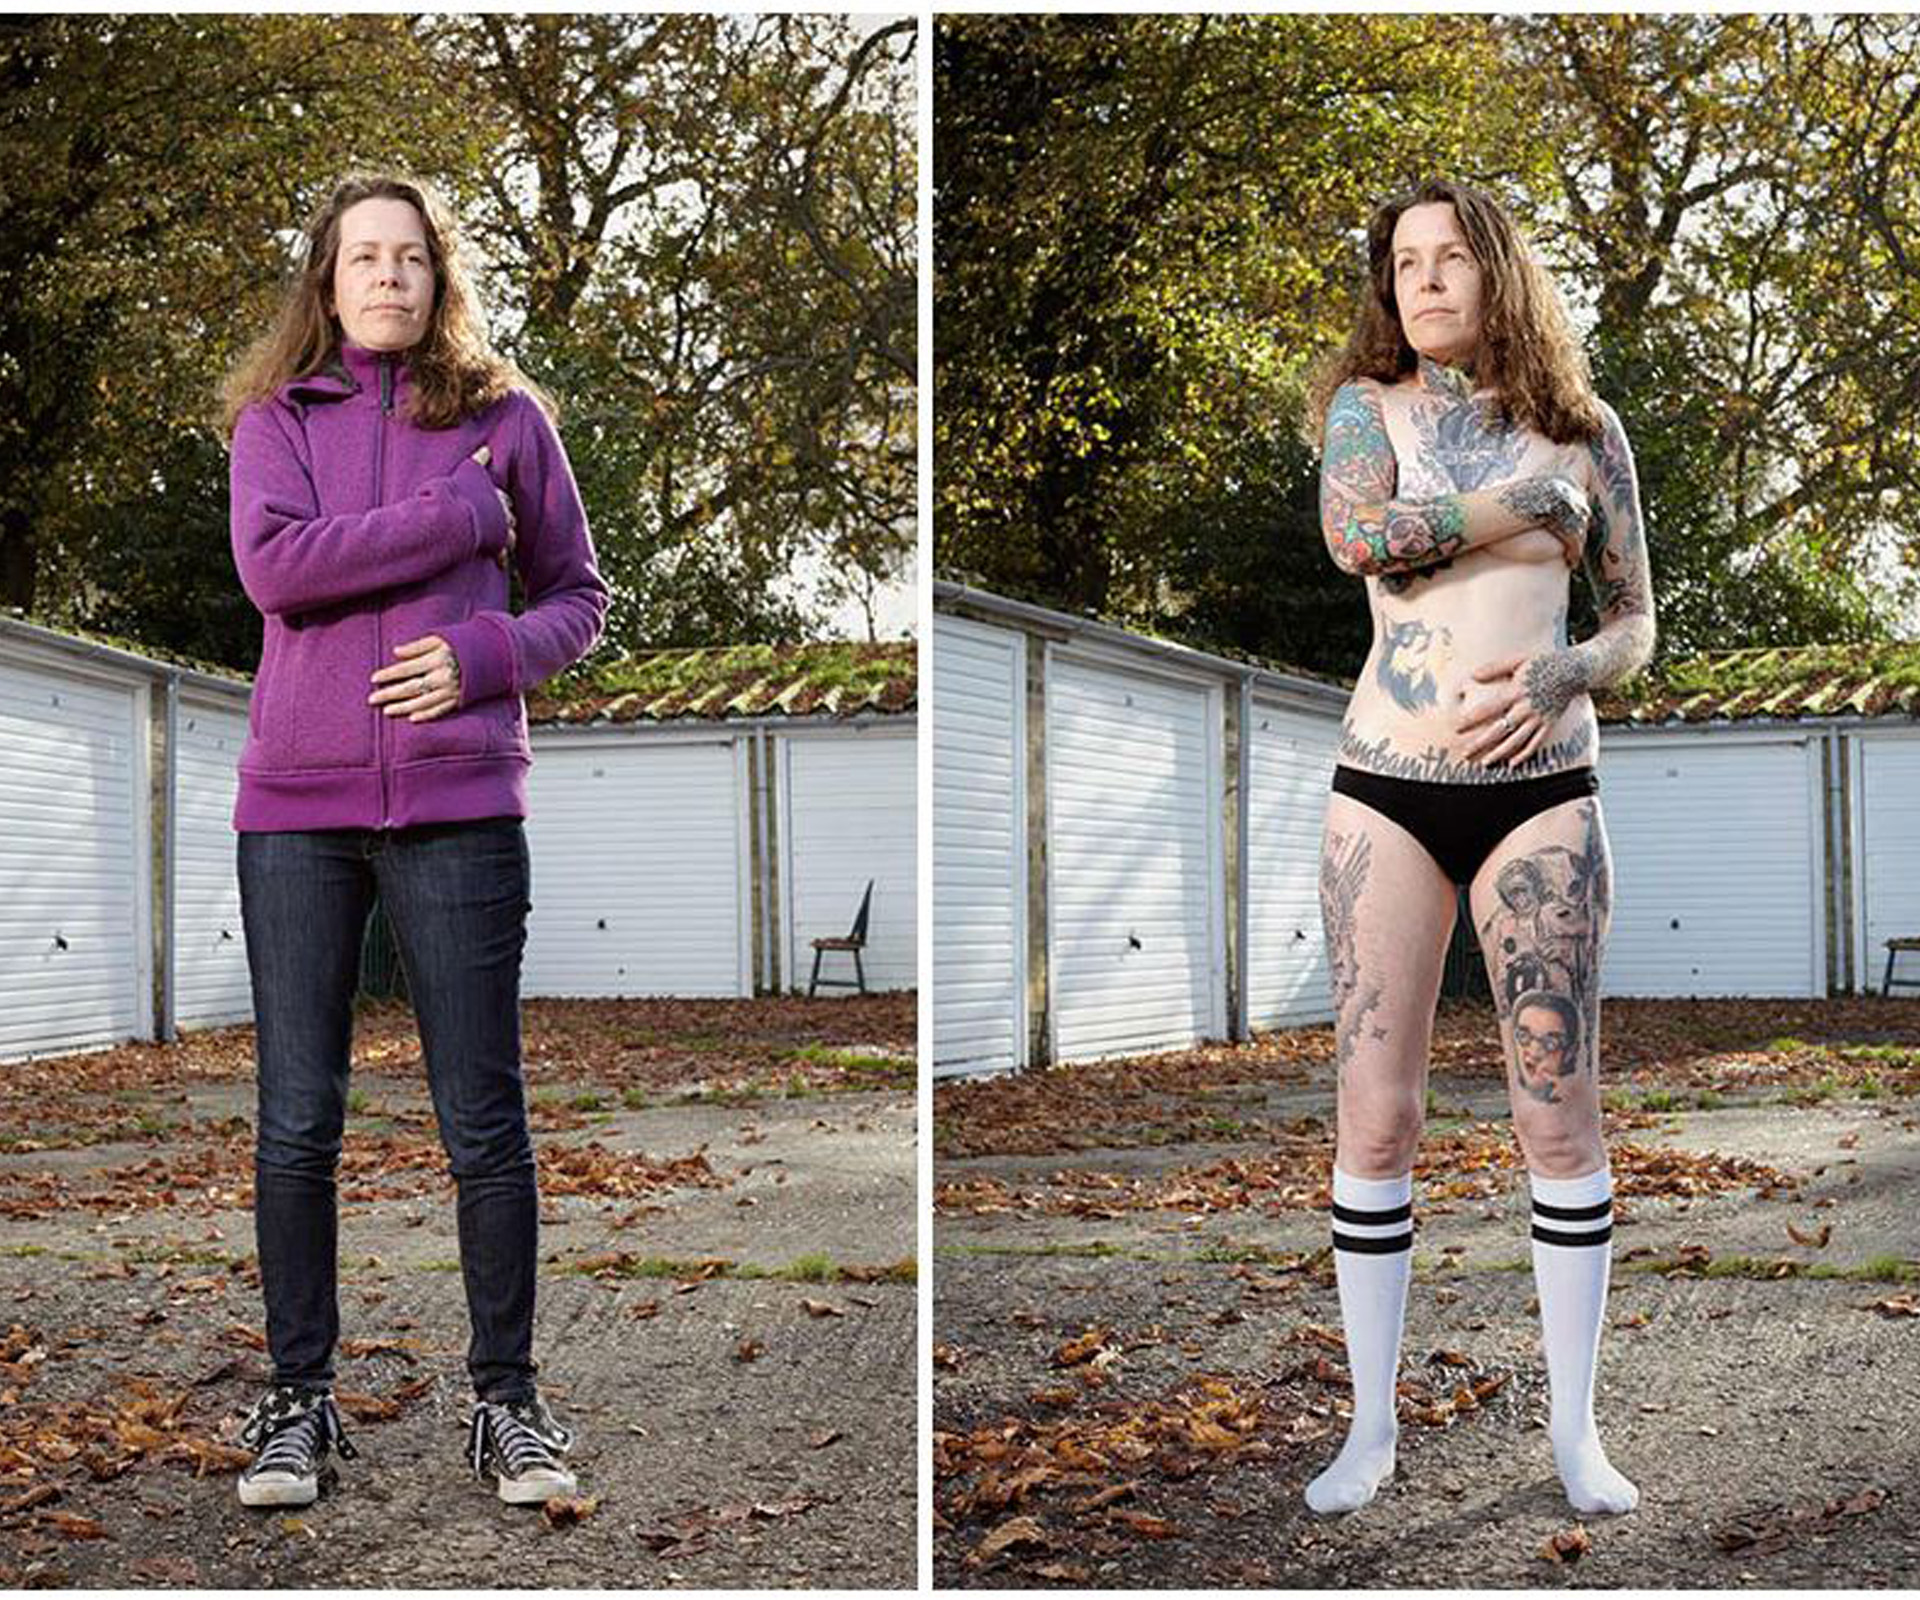 Tattoos uncovered in powerful series by photographer